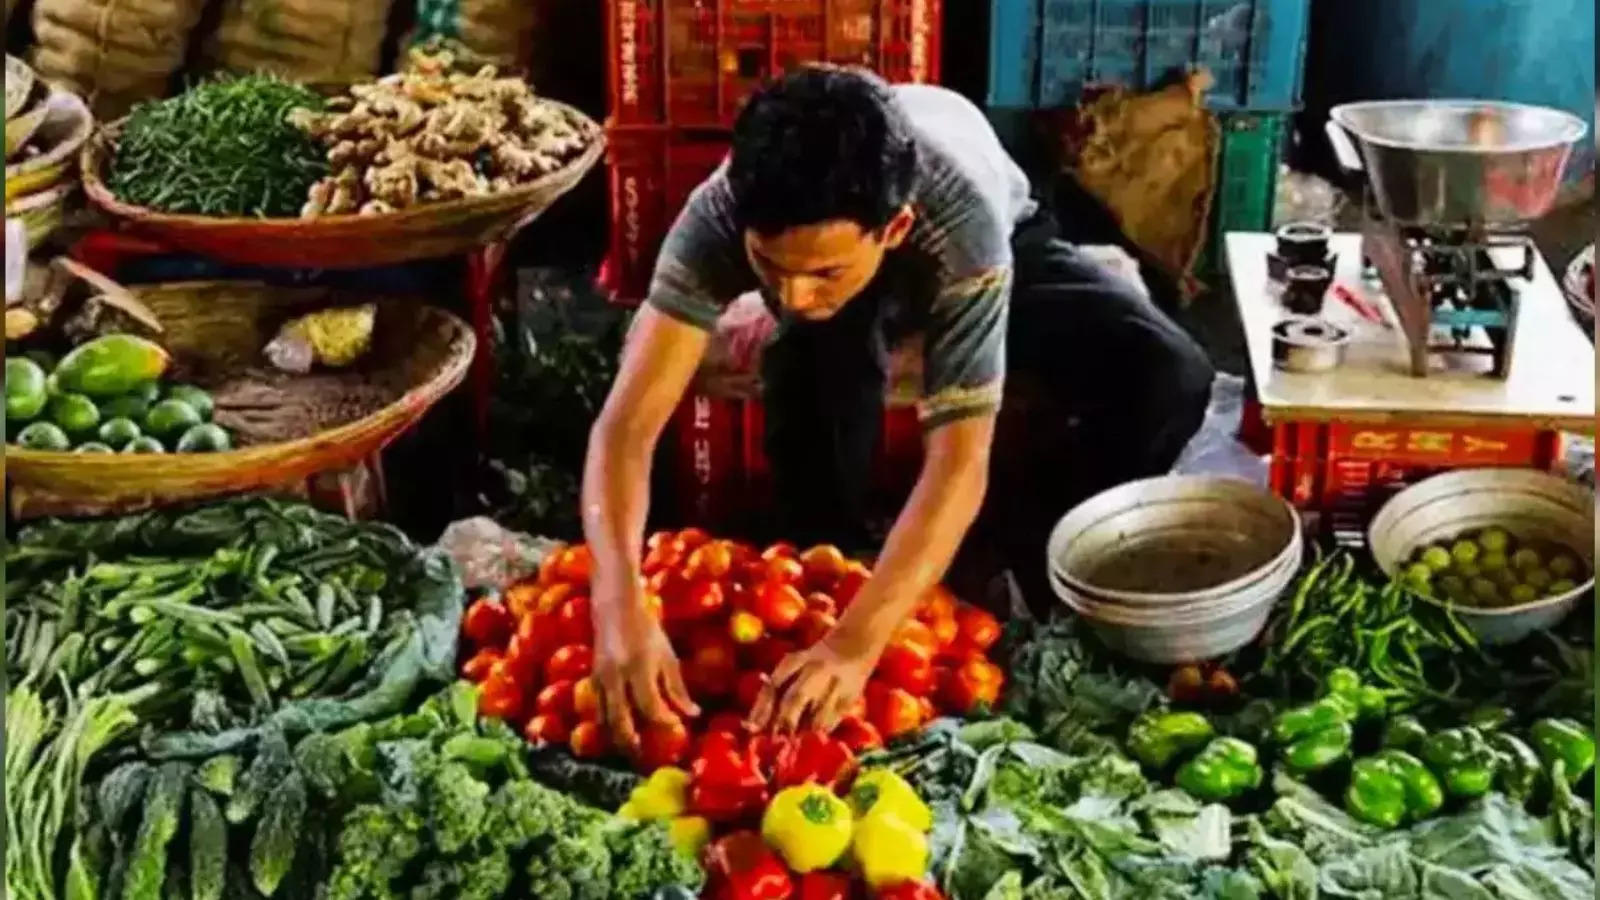 June retail inflation may remain unchanged at 4.7% 